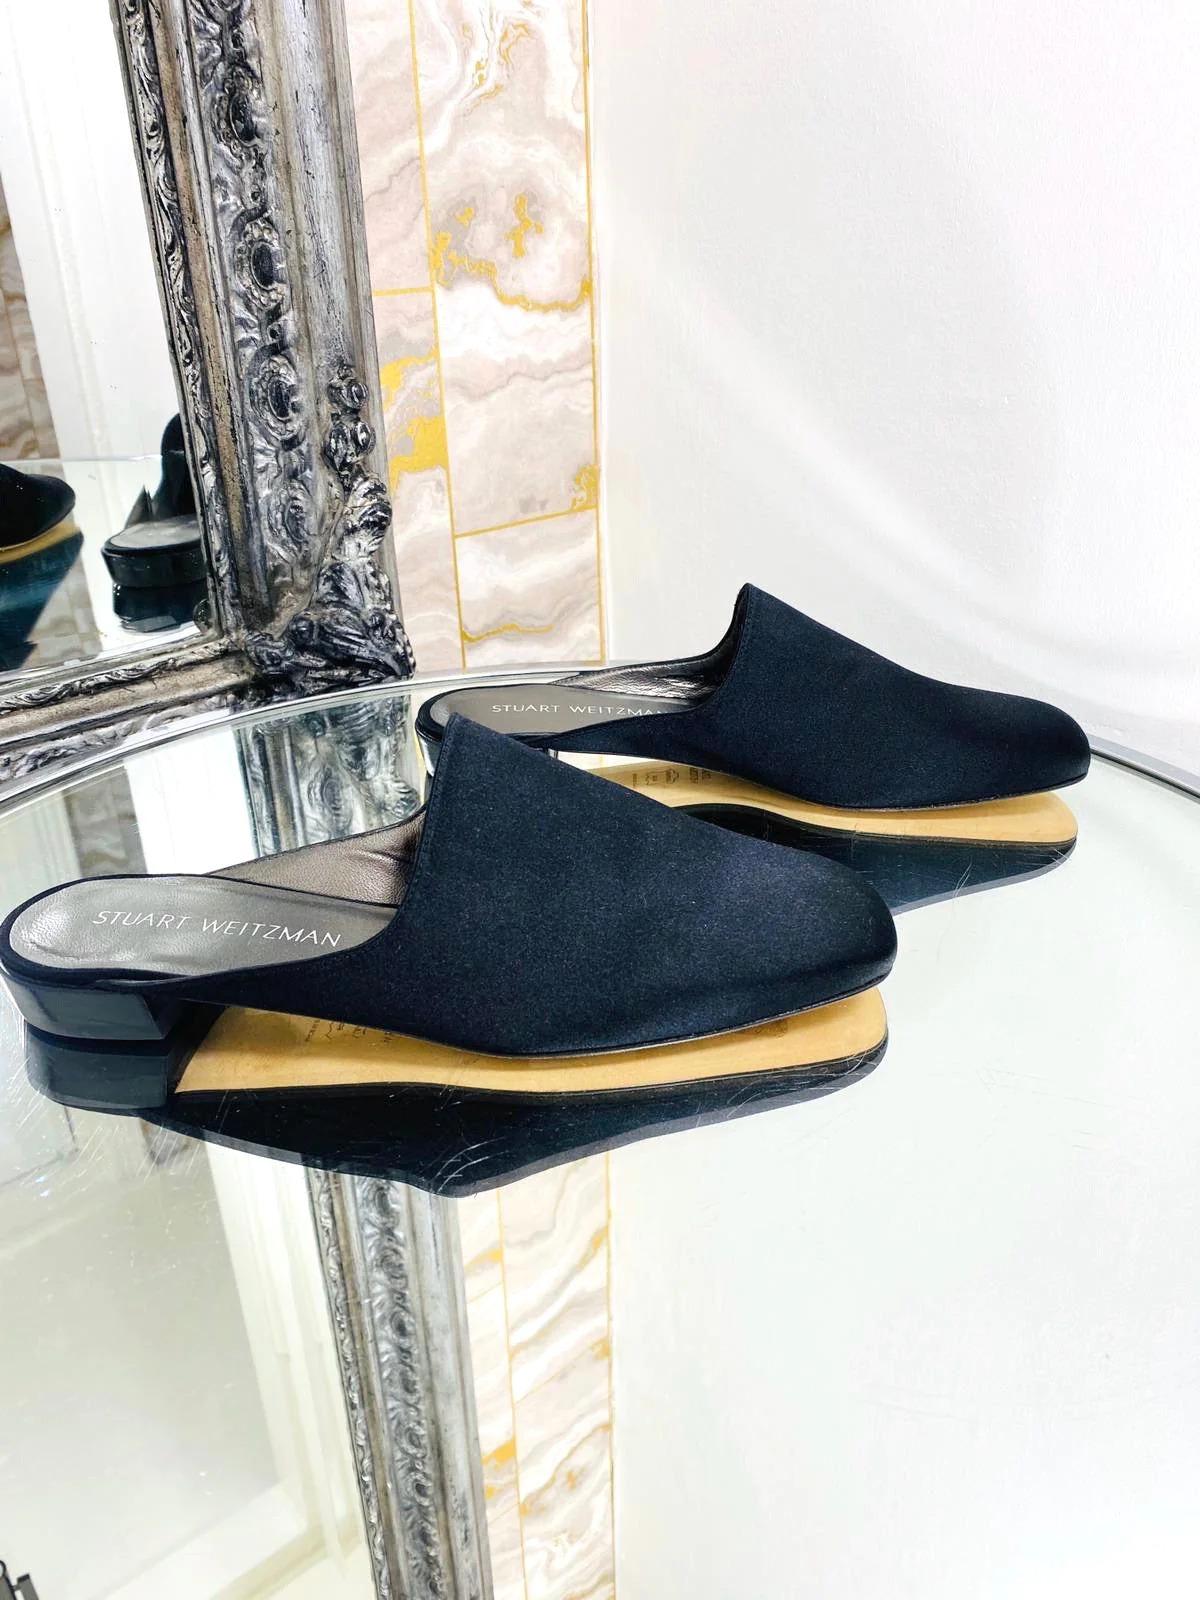 Stuart Weitzman Satin Mules In Excellent Condition For Sale In London, GB